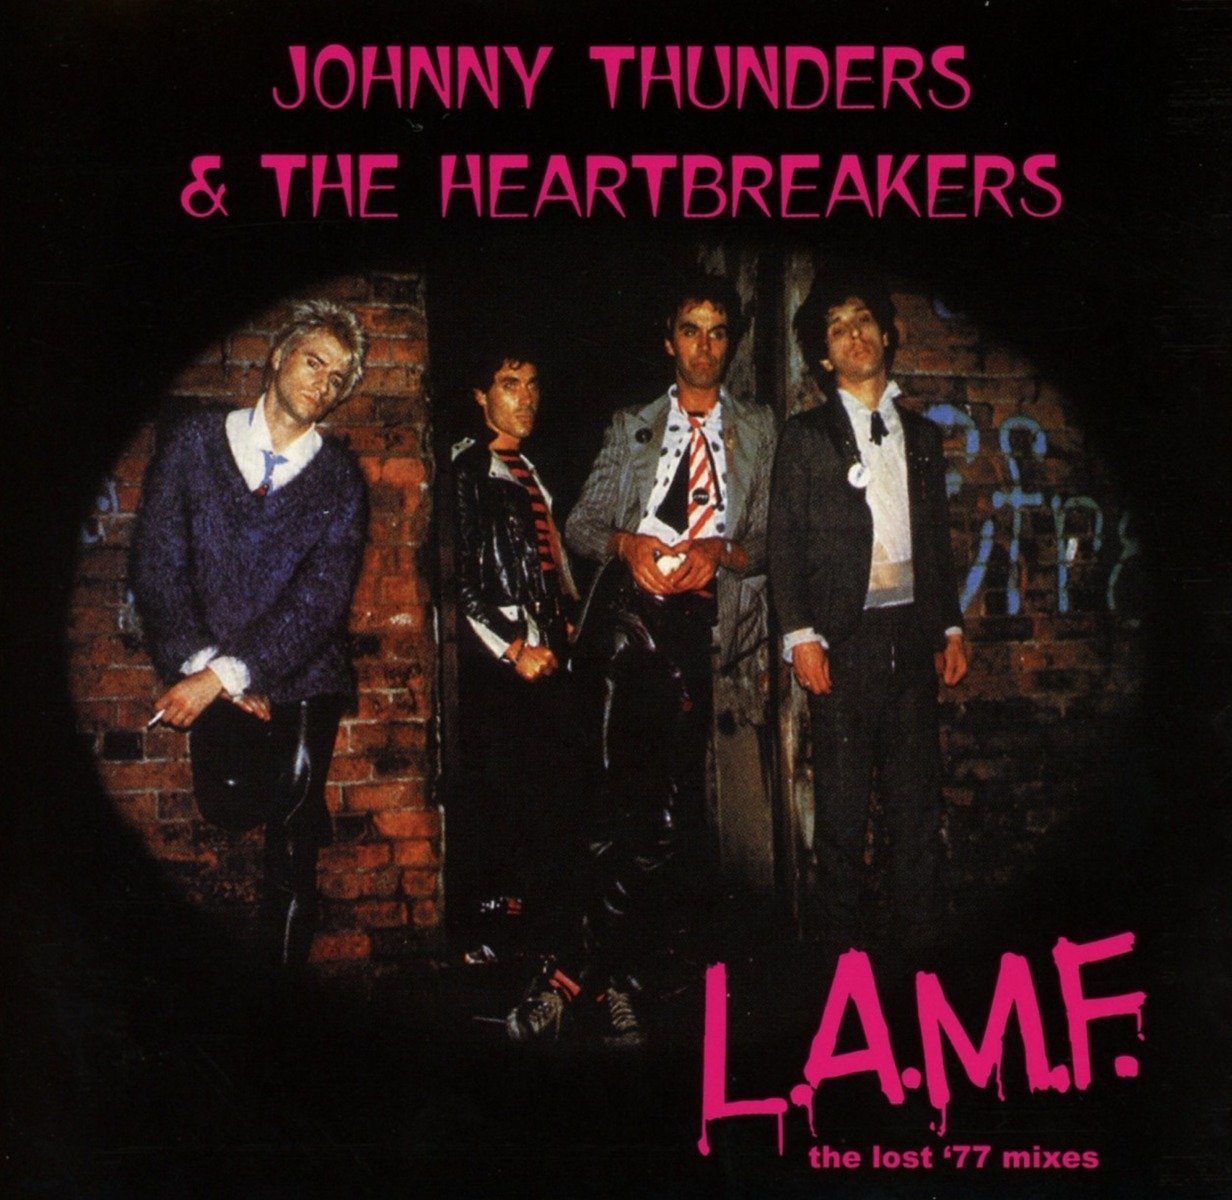 JOHNNY THUNDERS AND THE HEARTBREAKERS | L.A.M.F THE LOST 77' MIXES  - commonyouthbrand